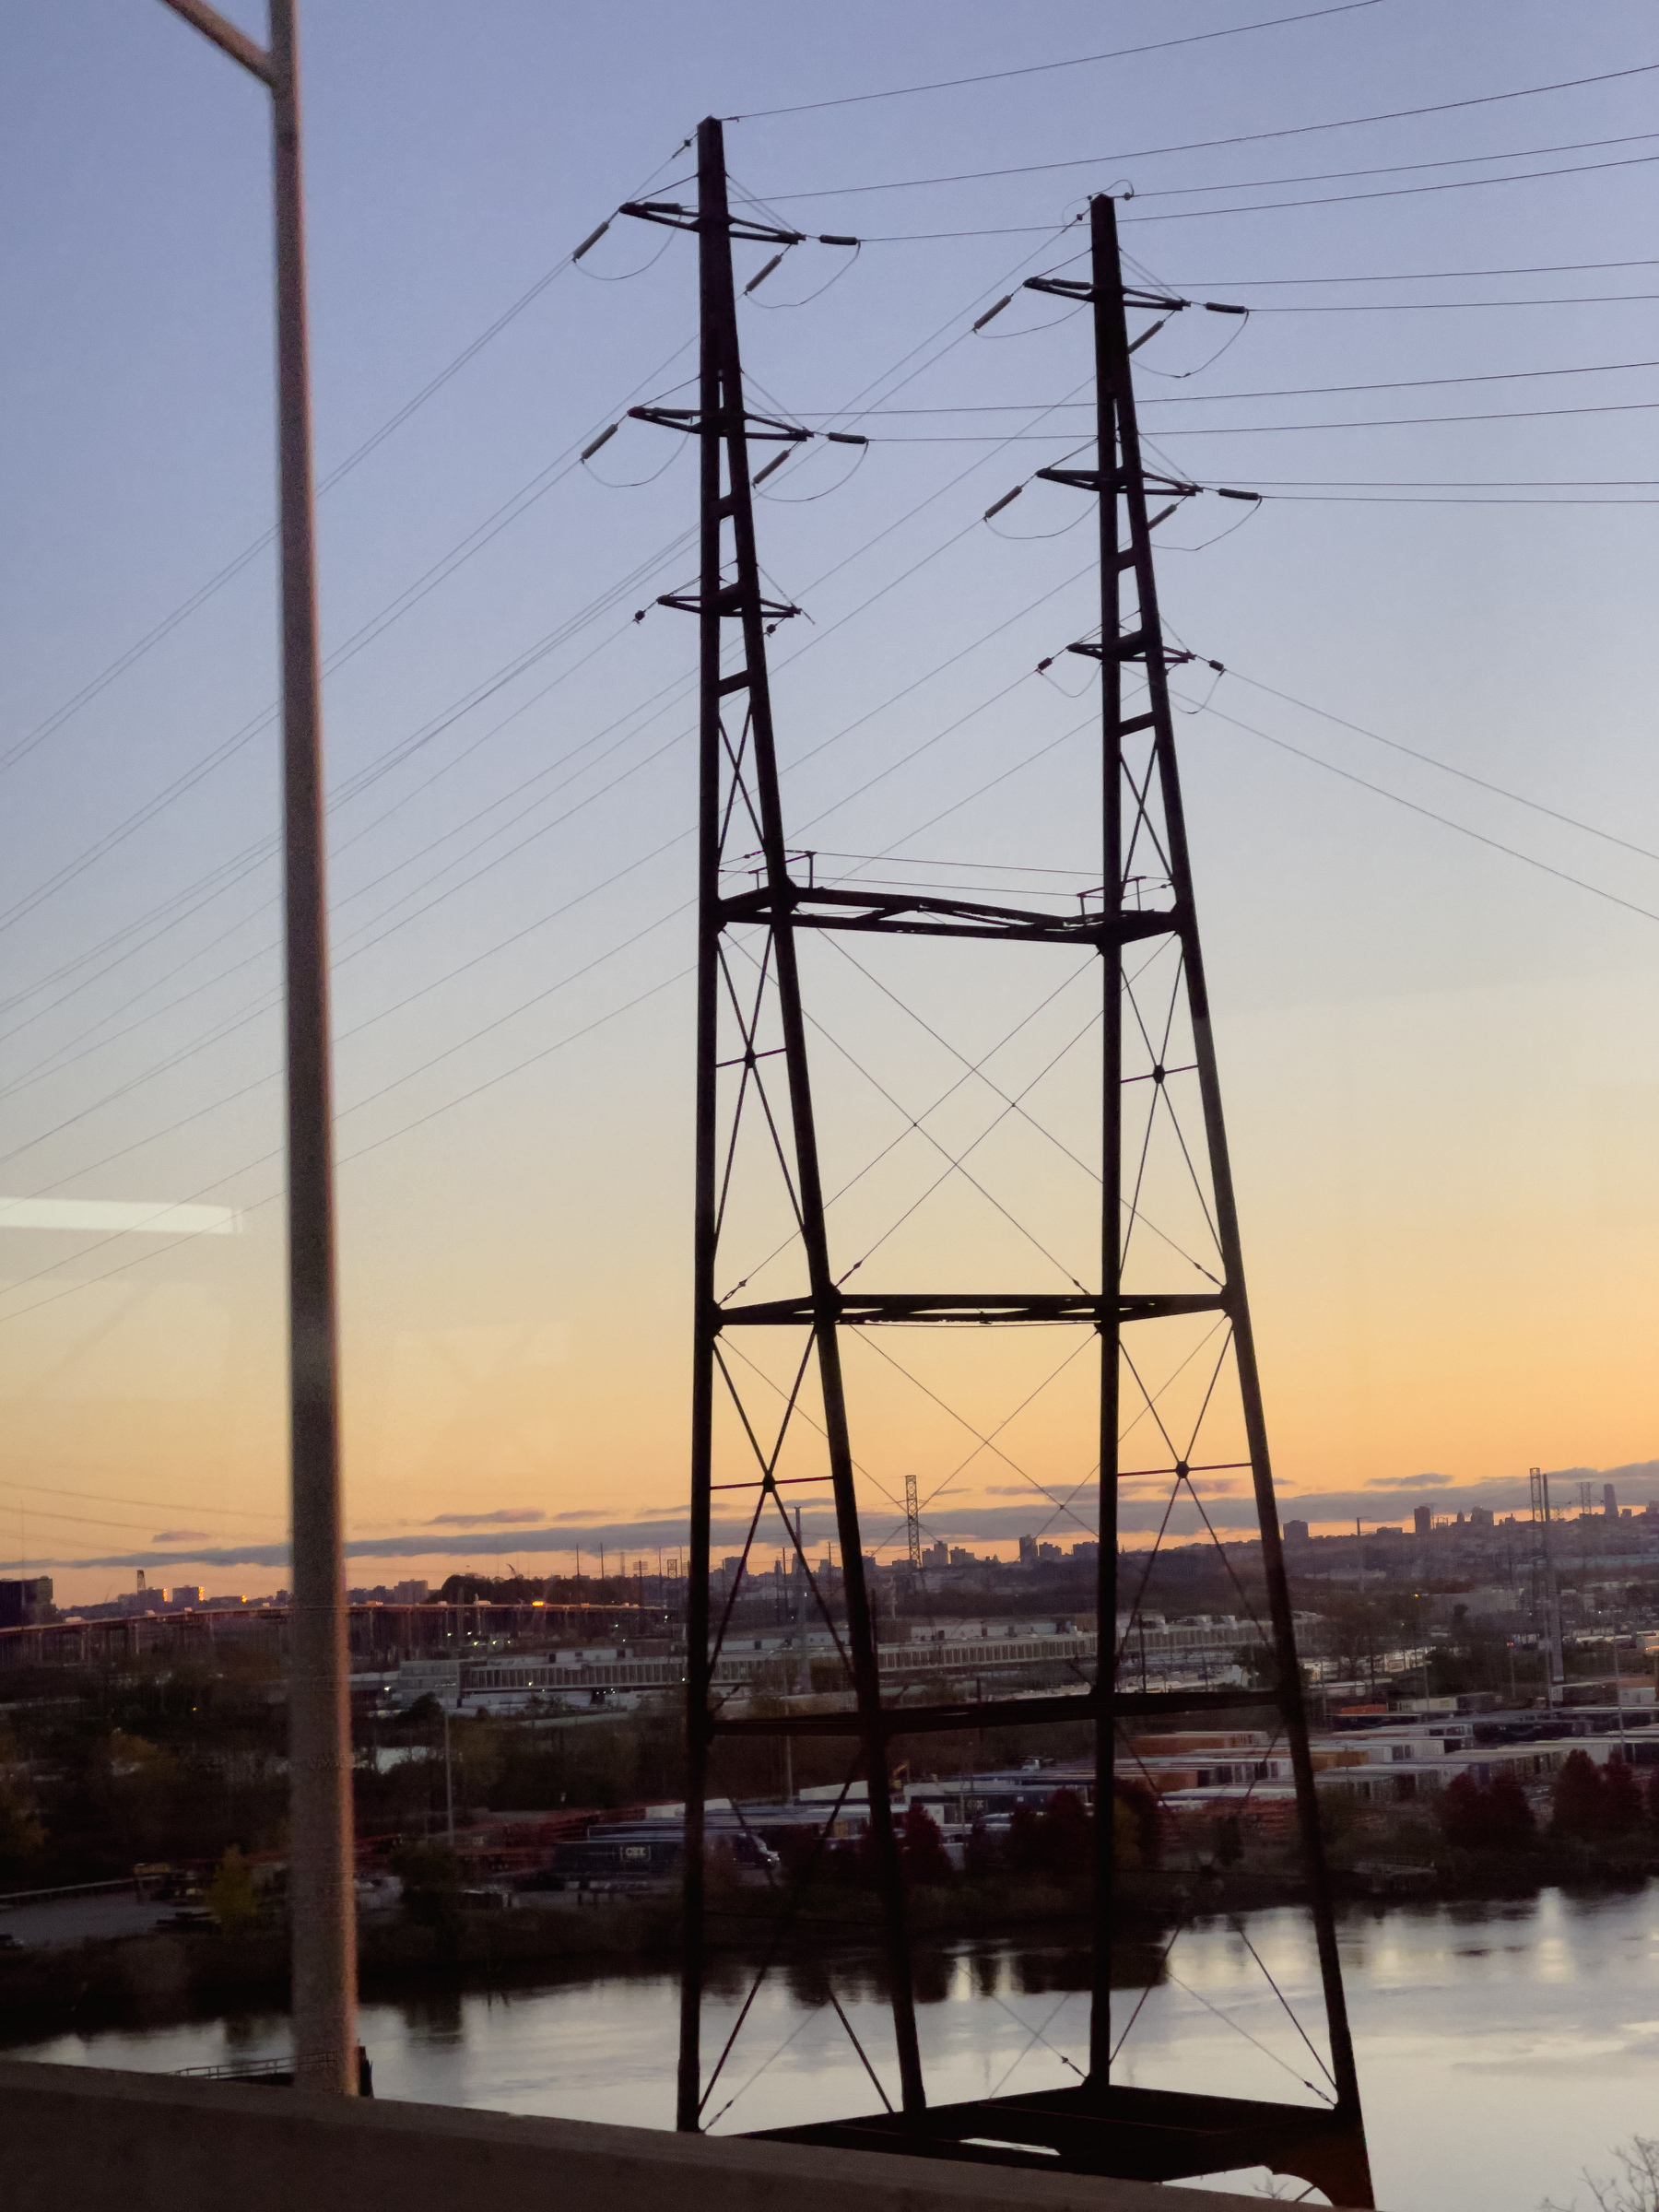 Transmission towers and wires with industrial landscape in background.